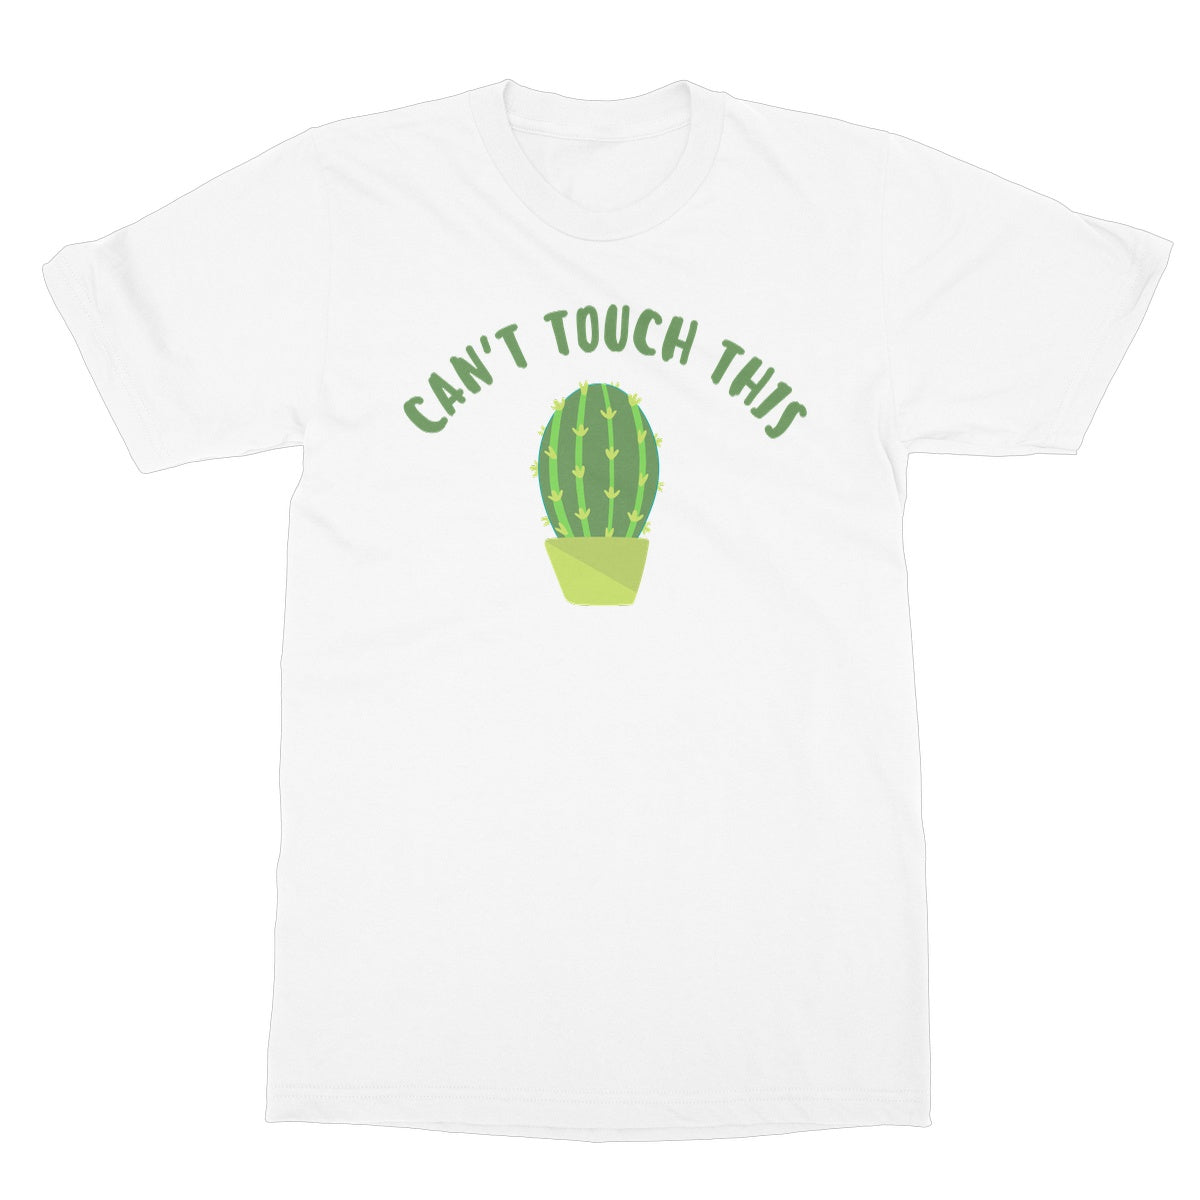 can't touch this t shirt white